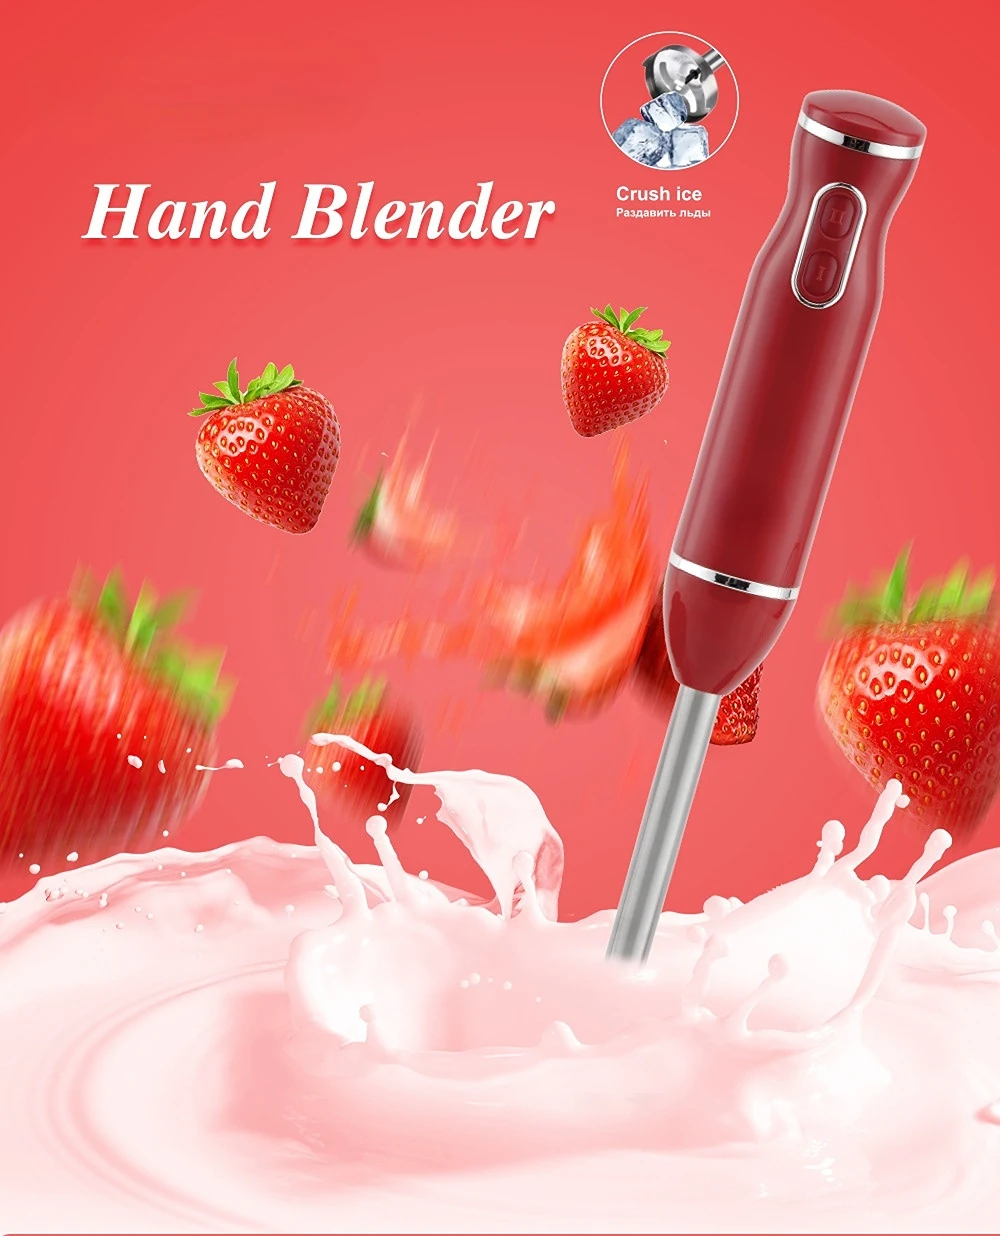 Chefman Multi-Speed Immersion Hand Blender with Stainless Steel Blades,  300W, Multi Purpose, Gray 